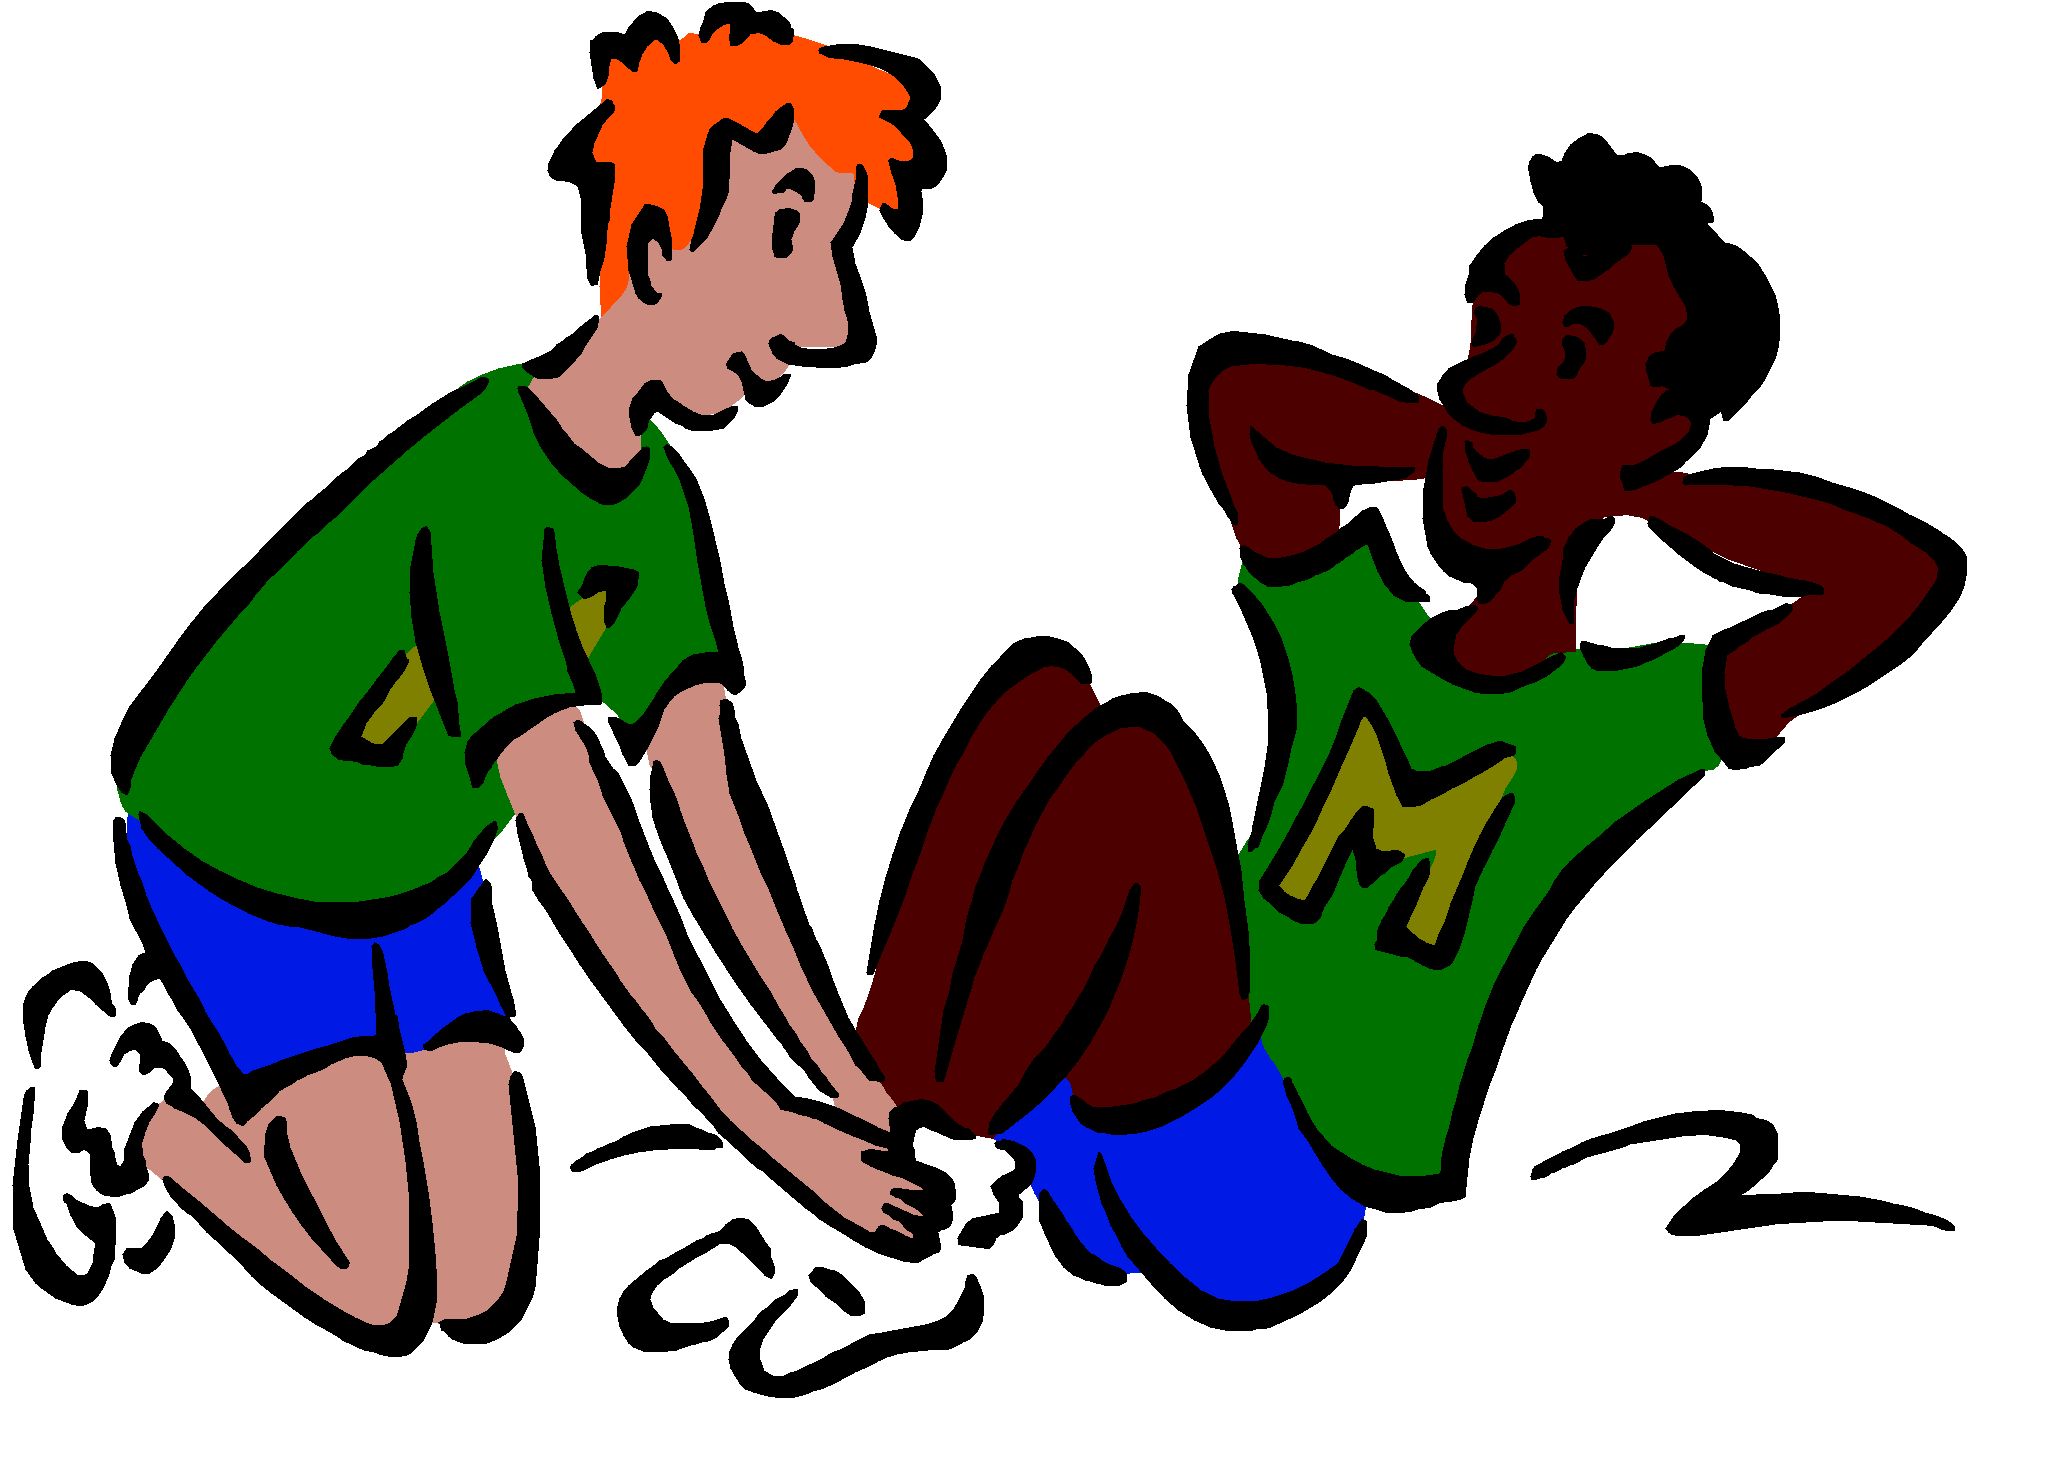 Website clipart non living. Physical education image lt